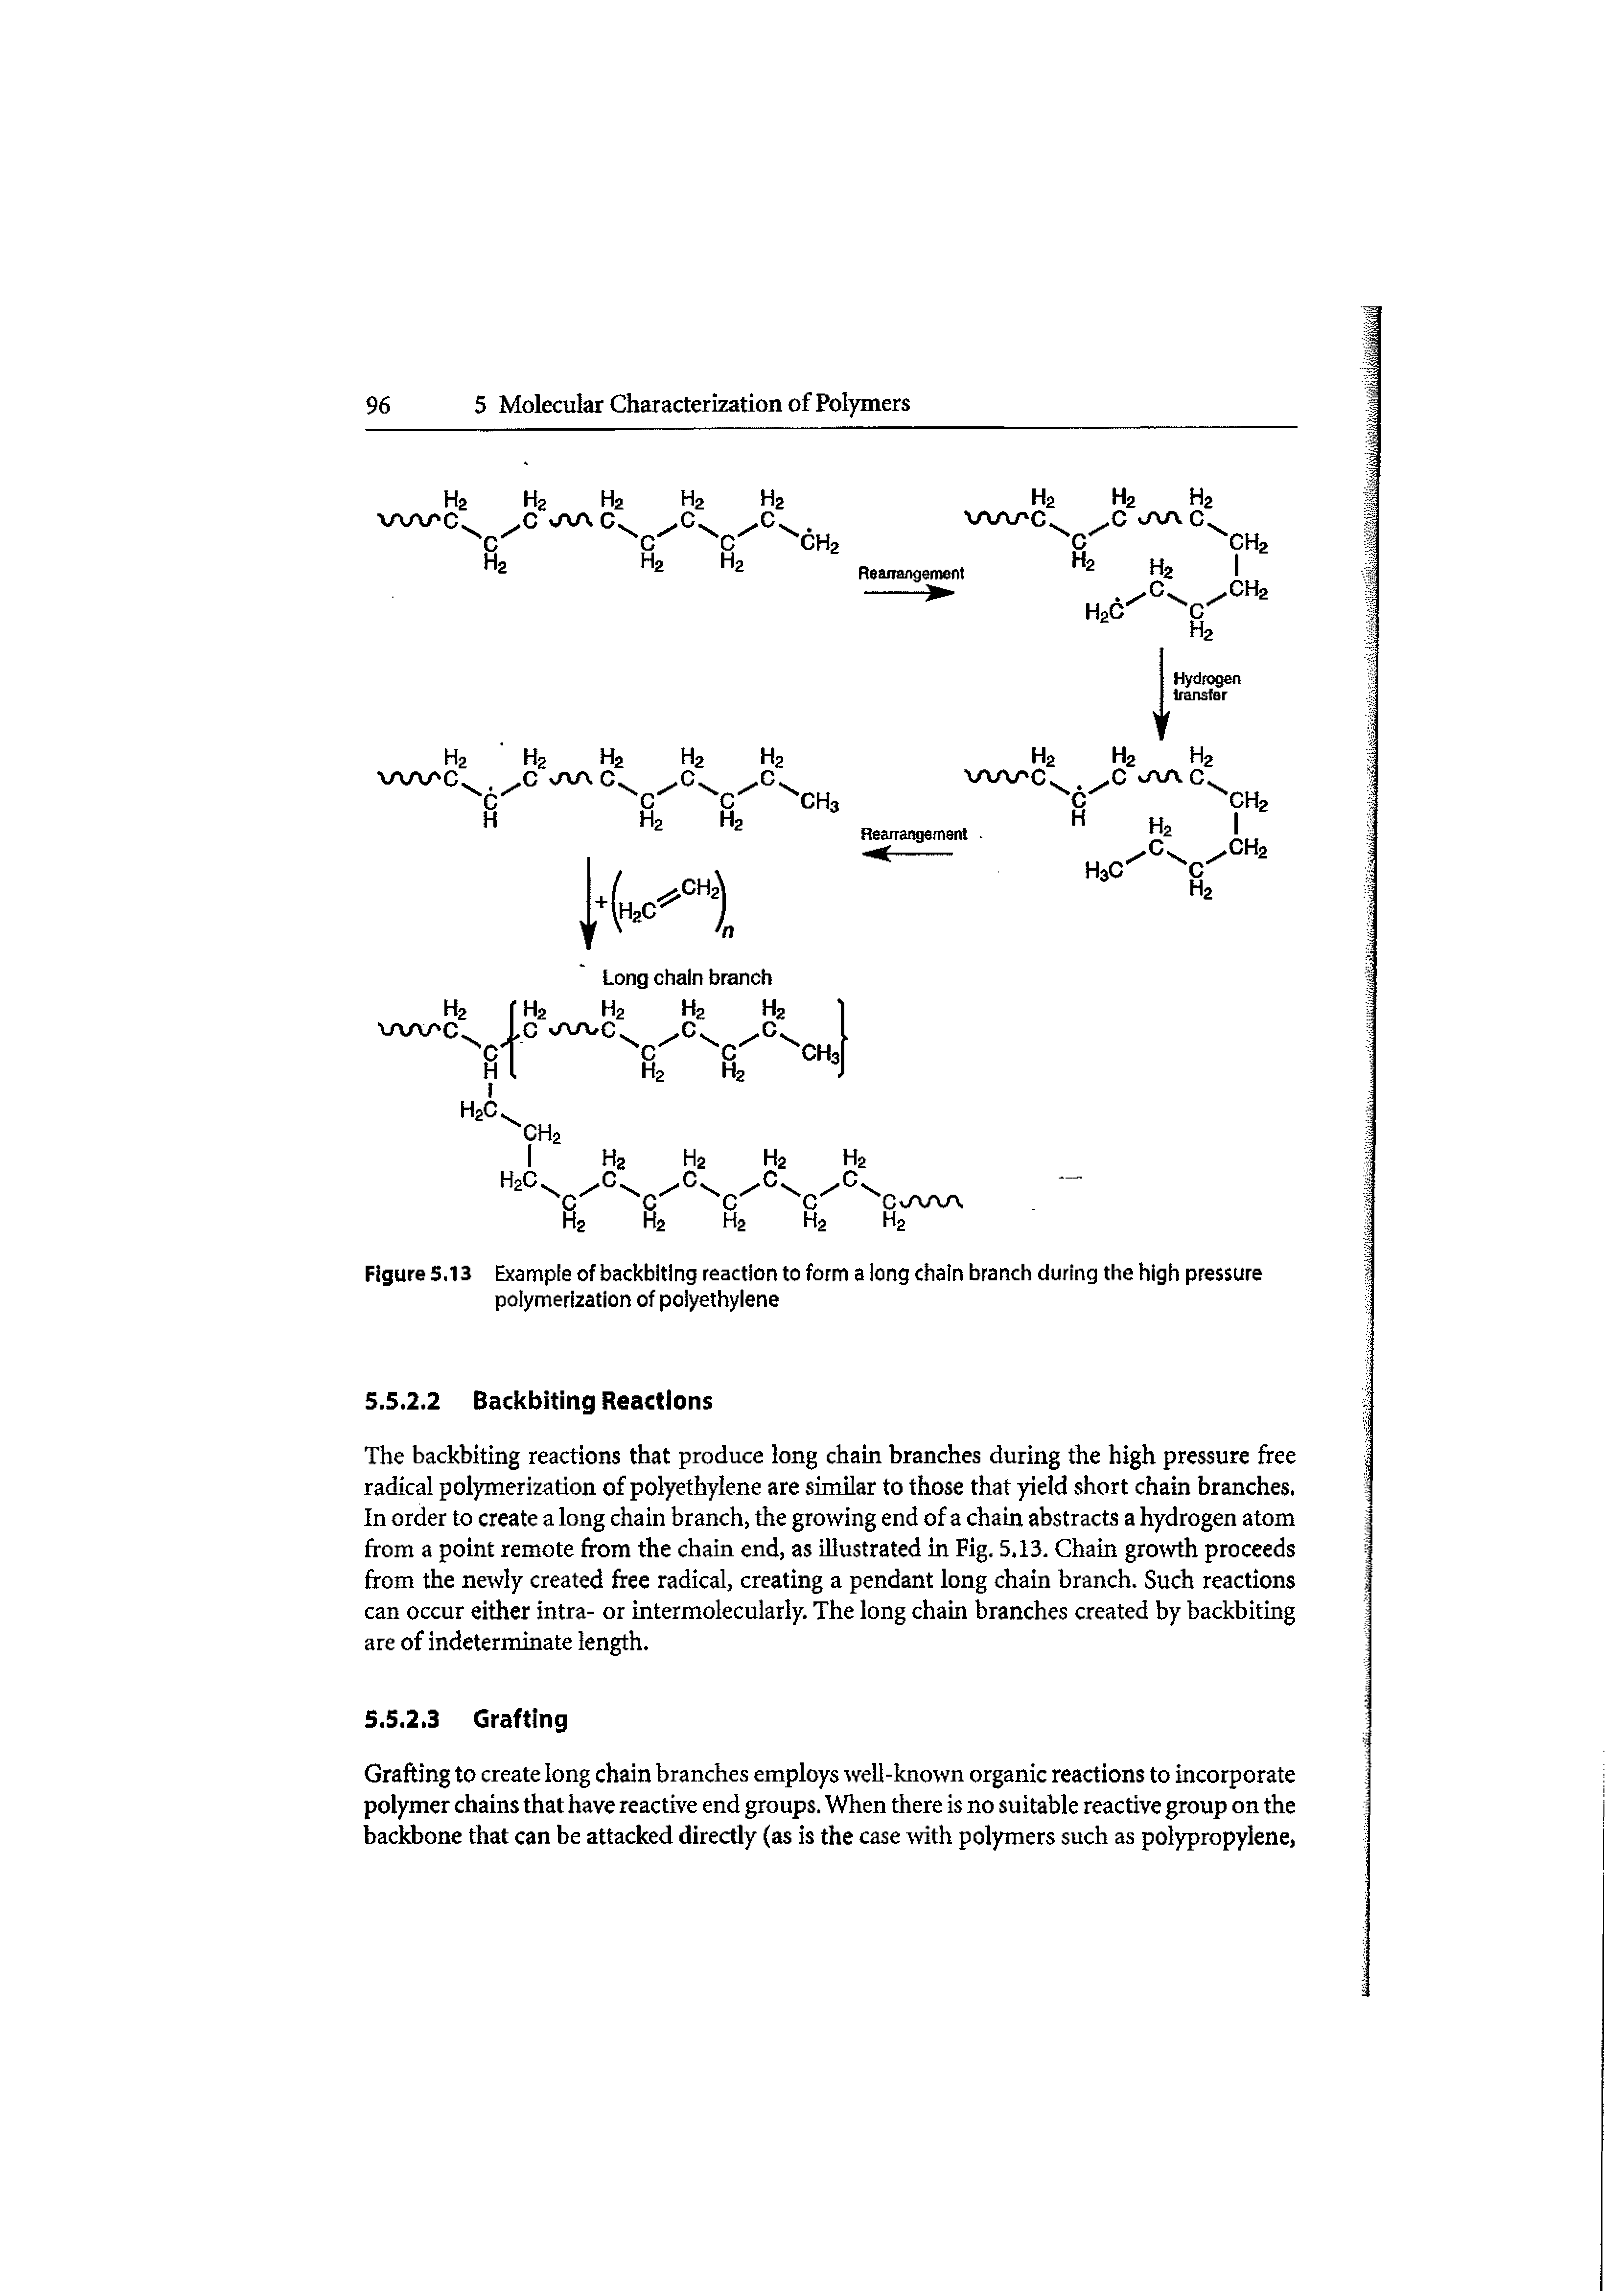 Figure 5.13 Example of backbiting reaction to form a long chain branch during the high pressure polymerization of polyethylene...